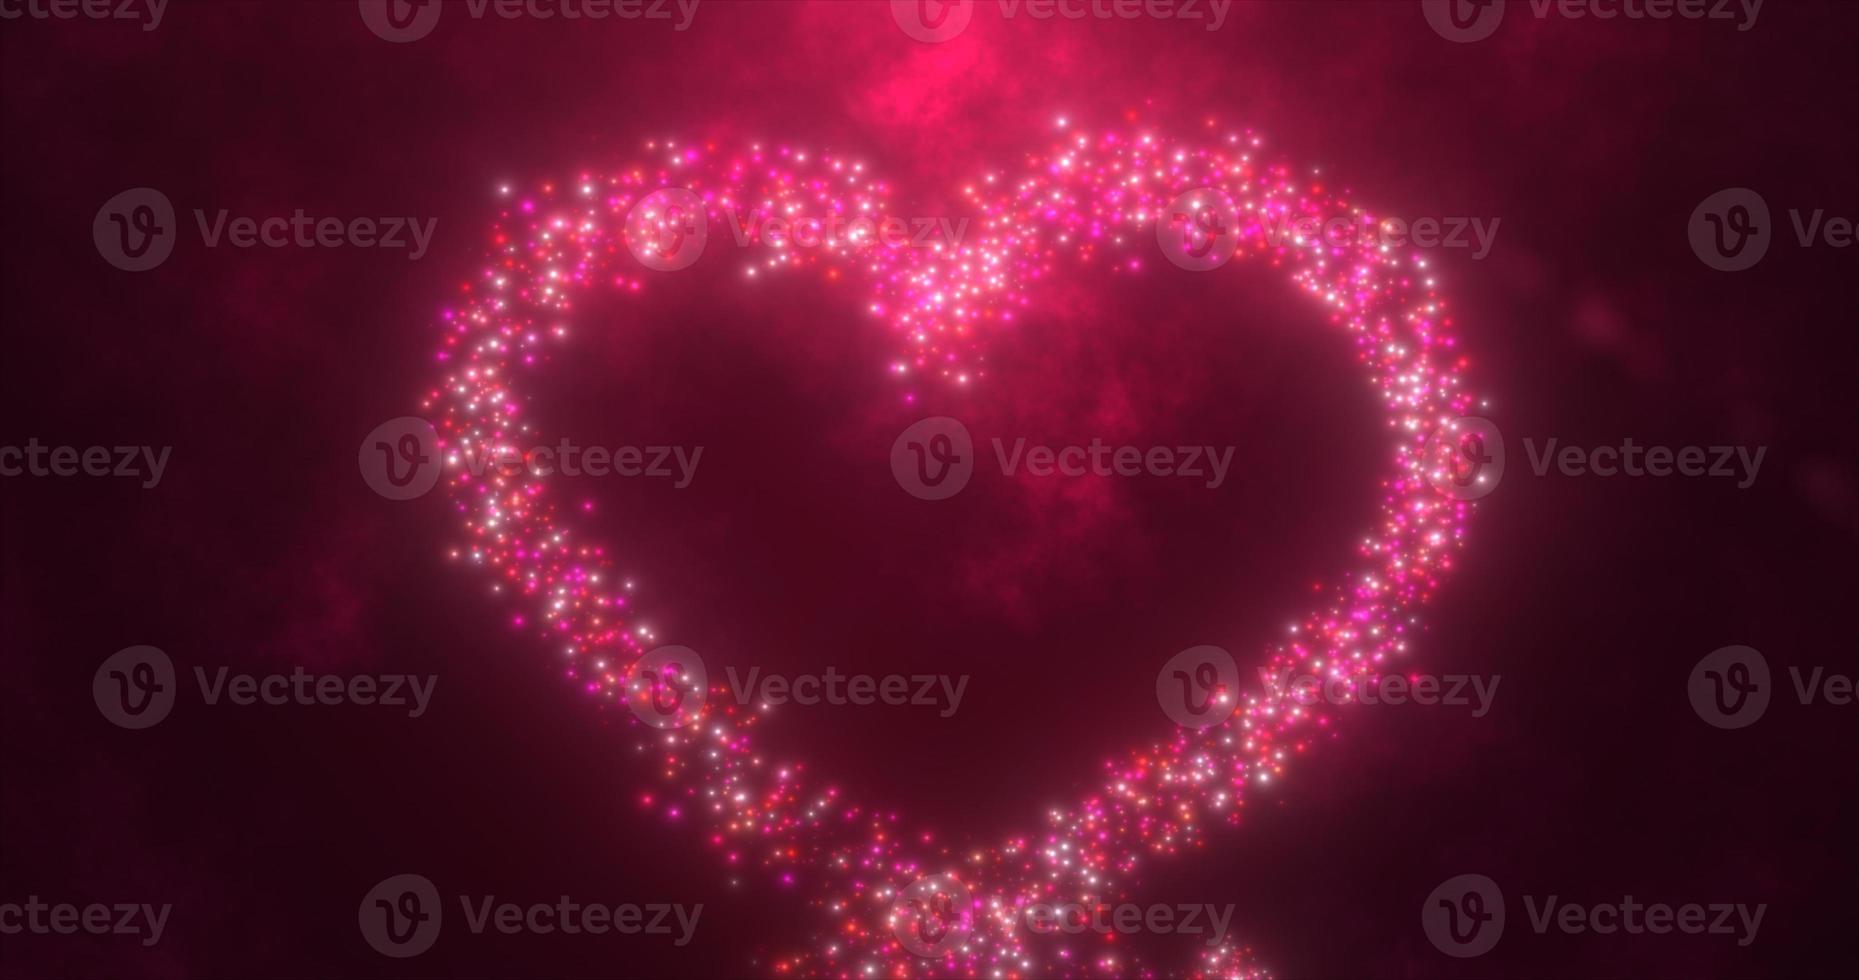 Glowing red love heart made of particles on a red festive background for Valentine's Day photo